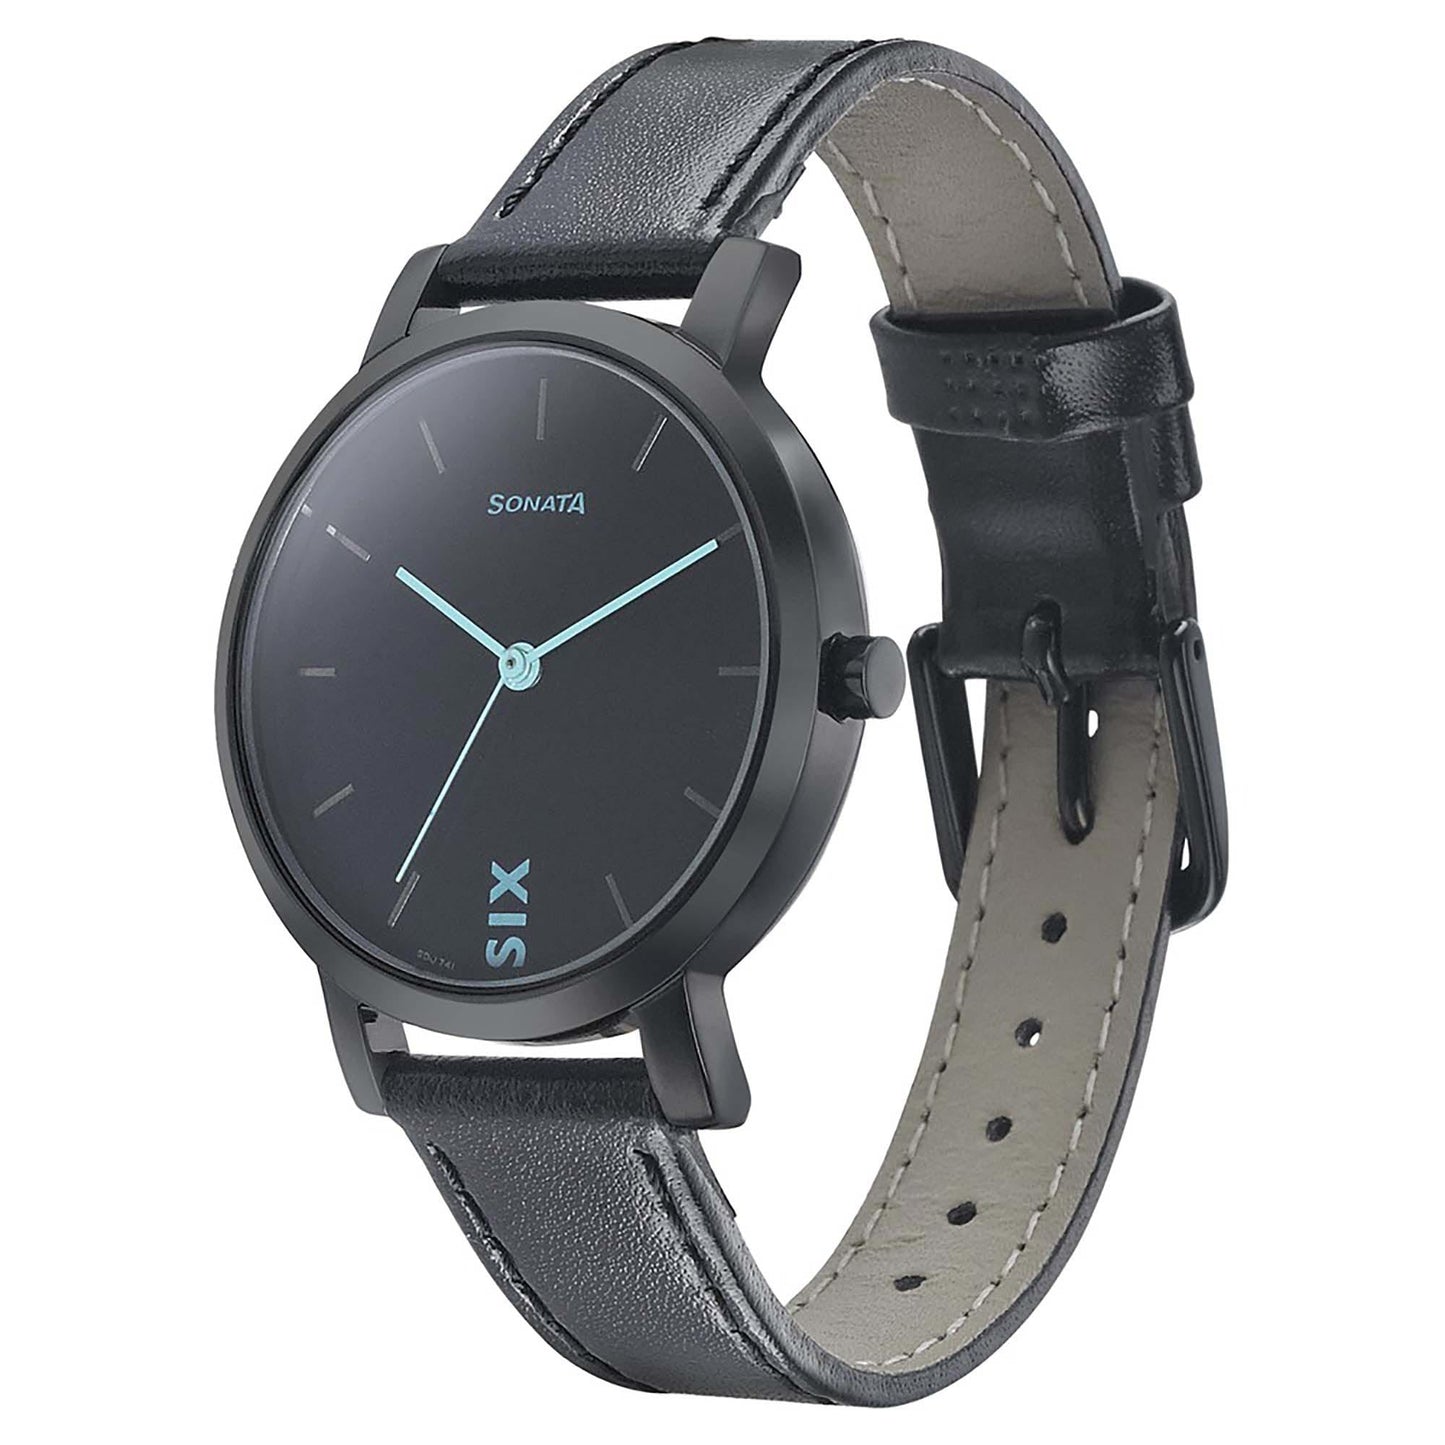 Sonata Play Black Dial Women Watch With Leather Strap